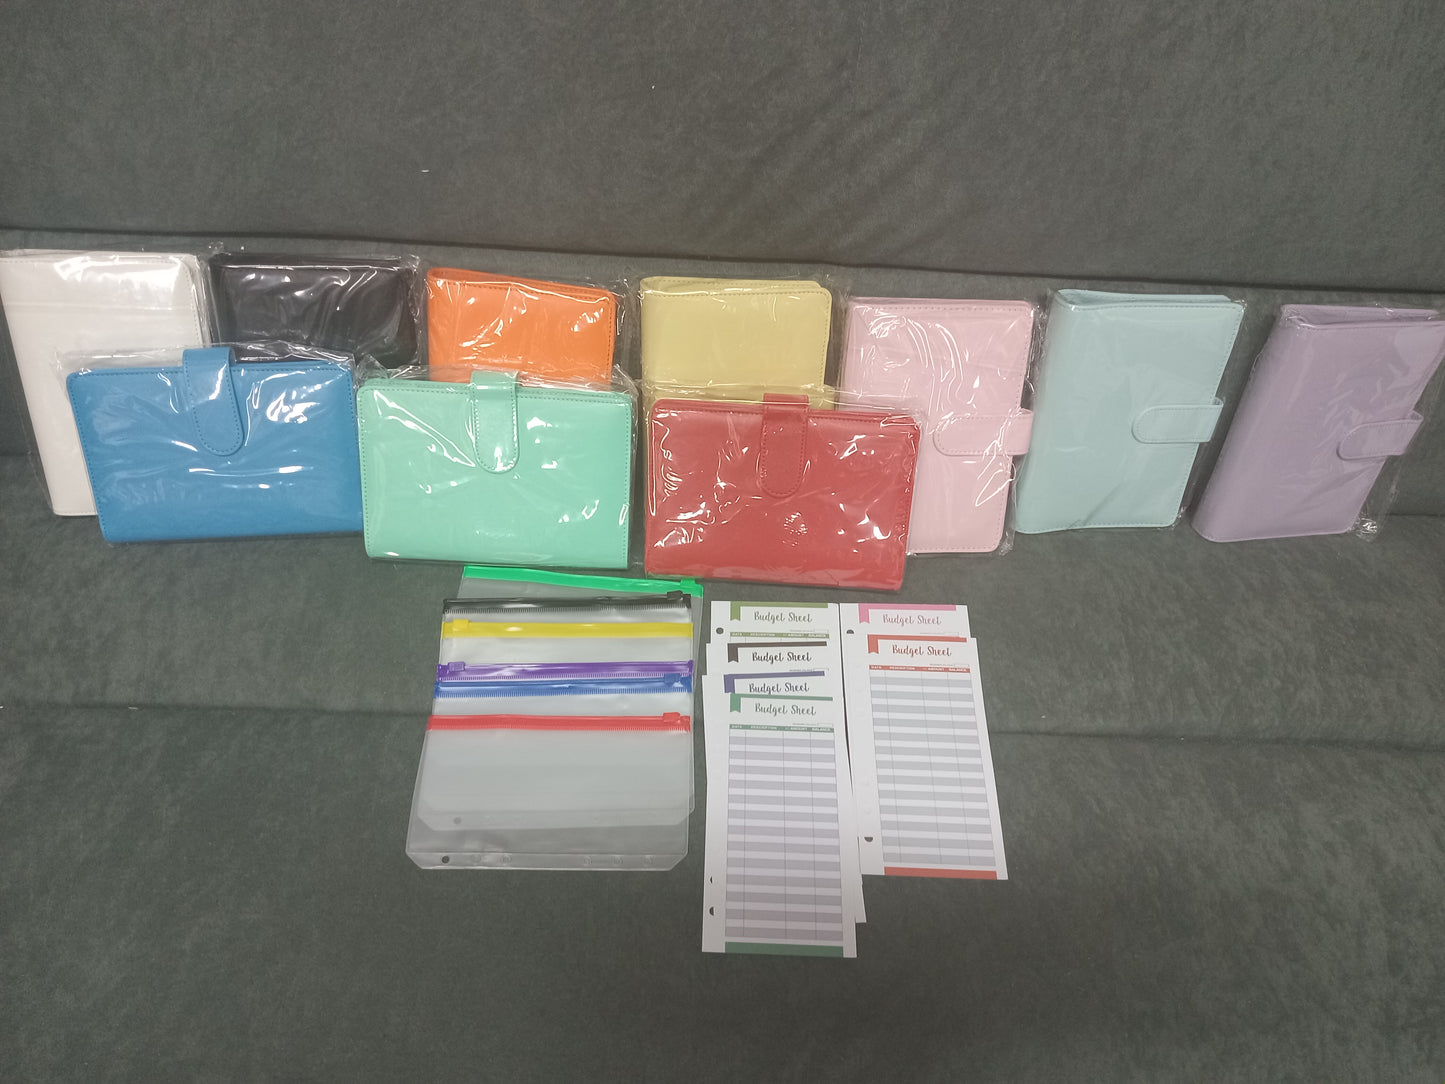 A6 Budget Binder with 6 Colorful Envelopes and 6 Colorful Budget Sheet Trackers